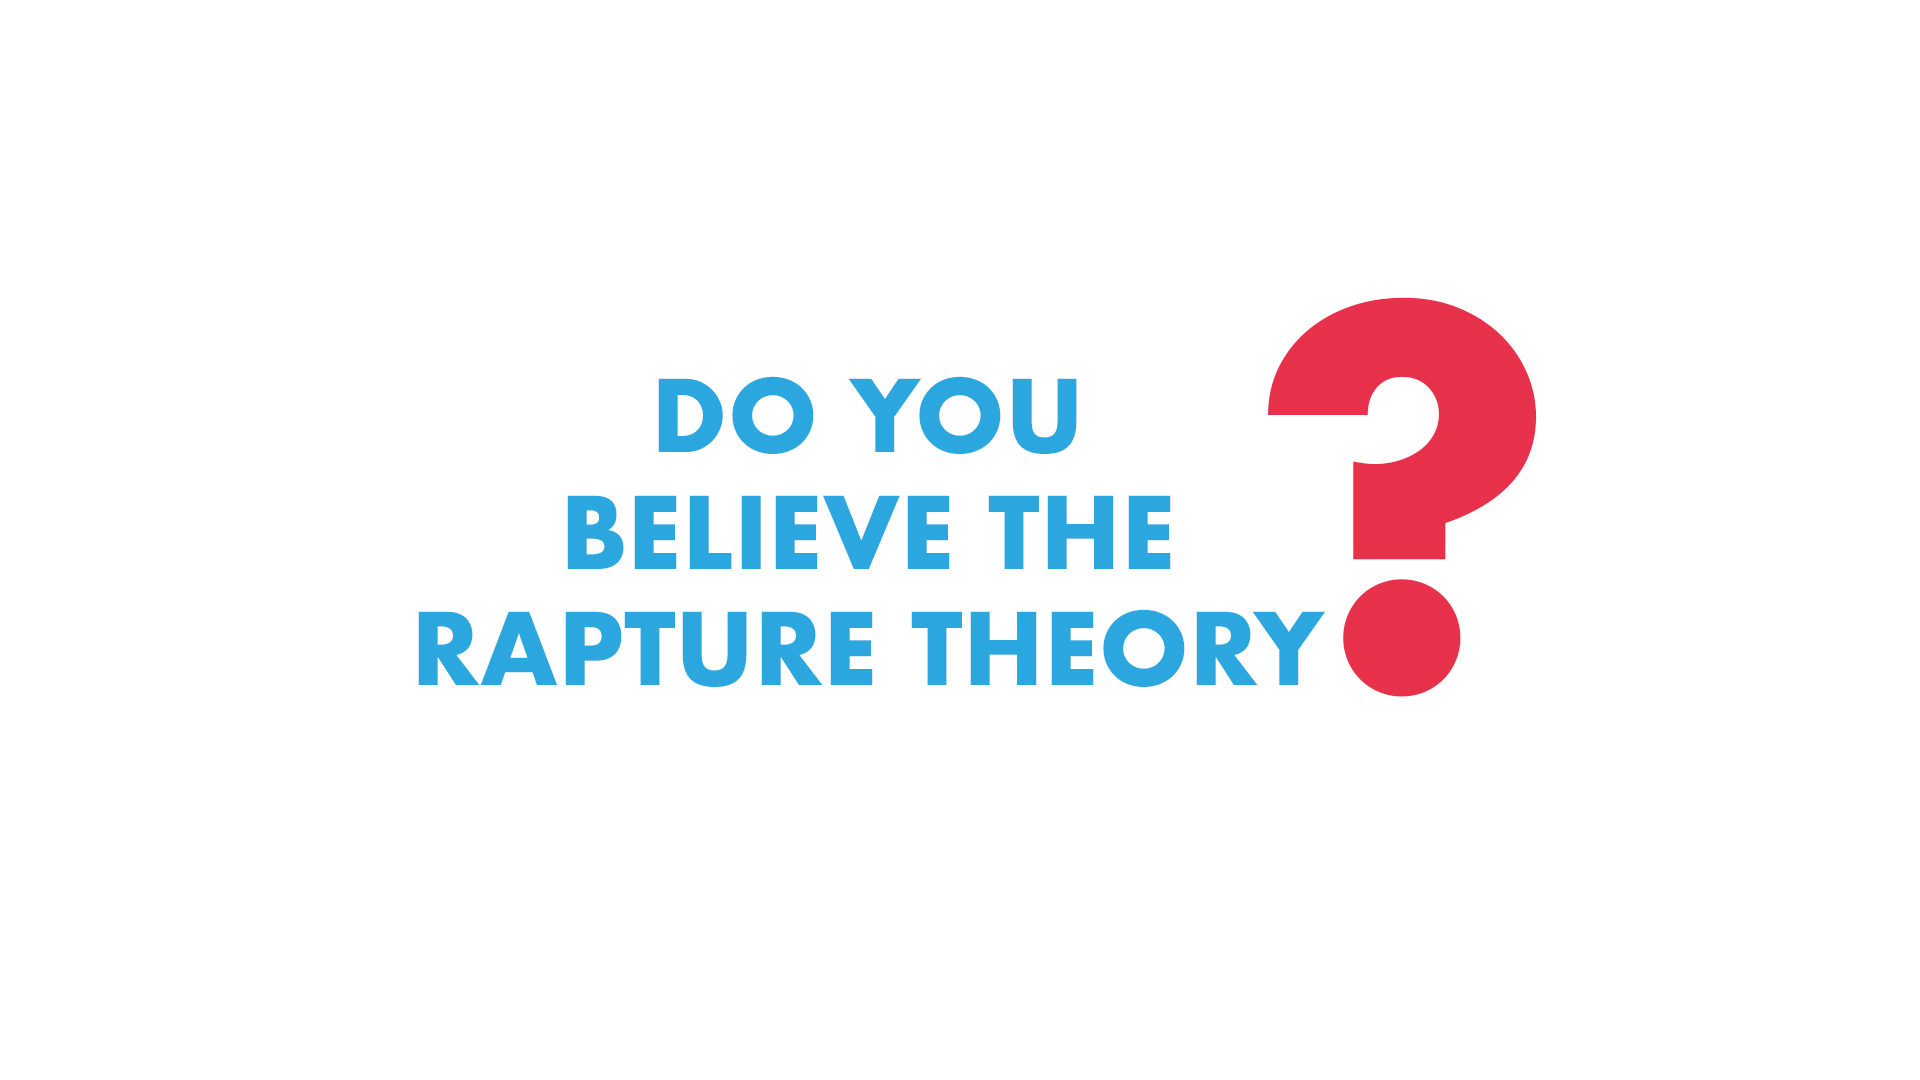 Do You Believe the Rapture Theory?